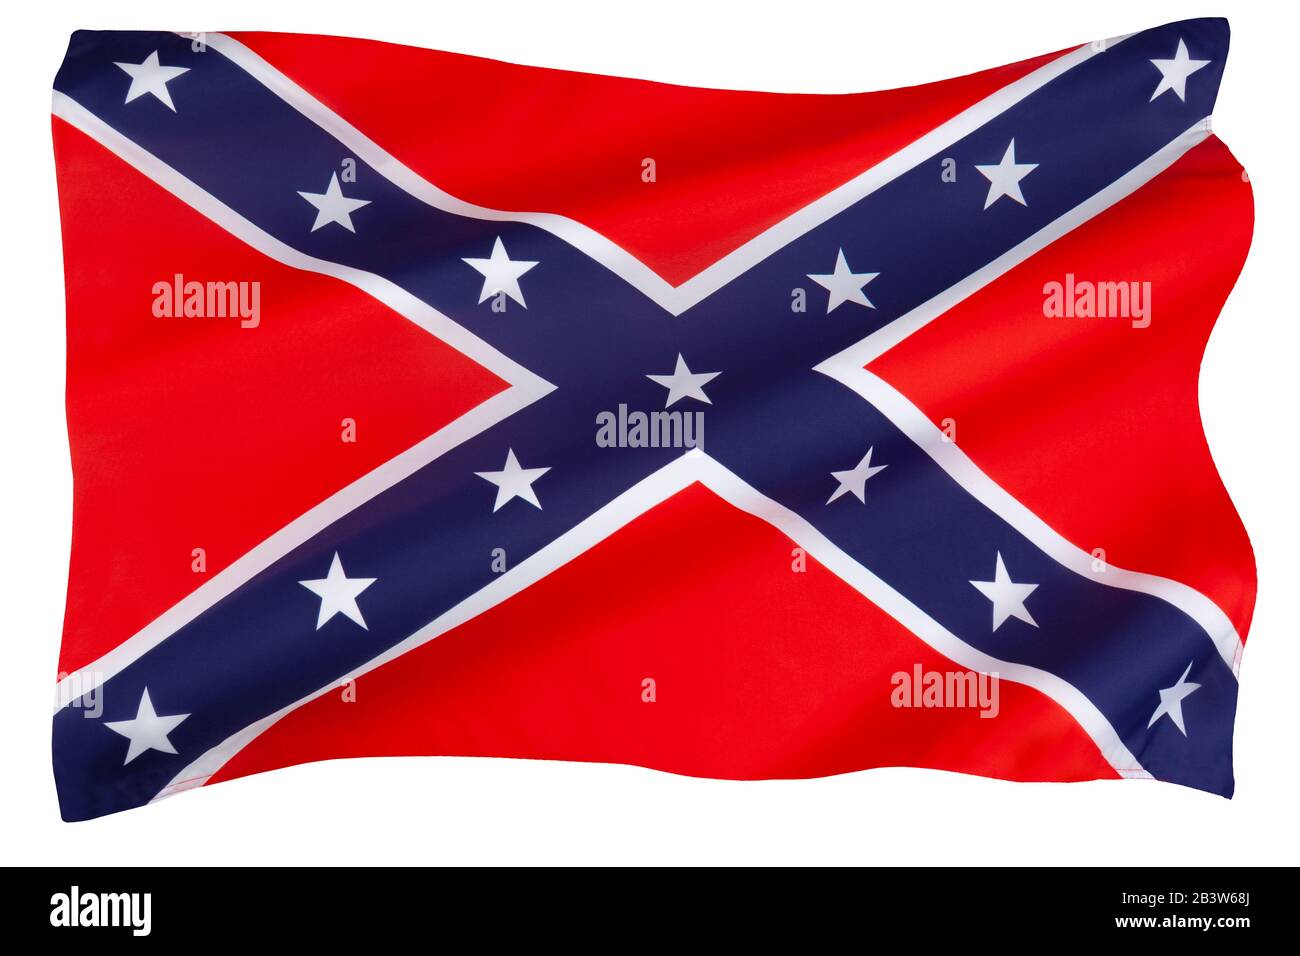 Flag of the Confederate States of America. Its use started in response to the civil rights movement in the 1950s and 1960s and continues to the presen Stock Photo